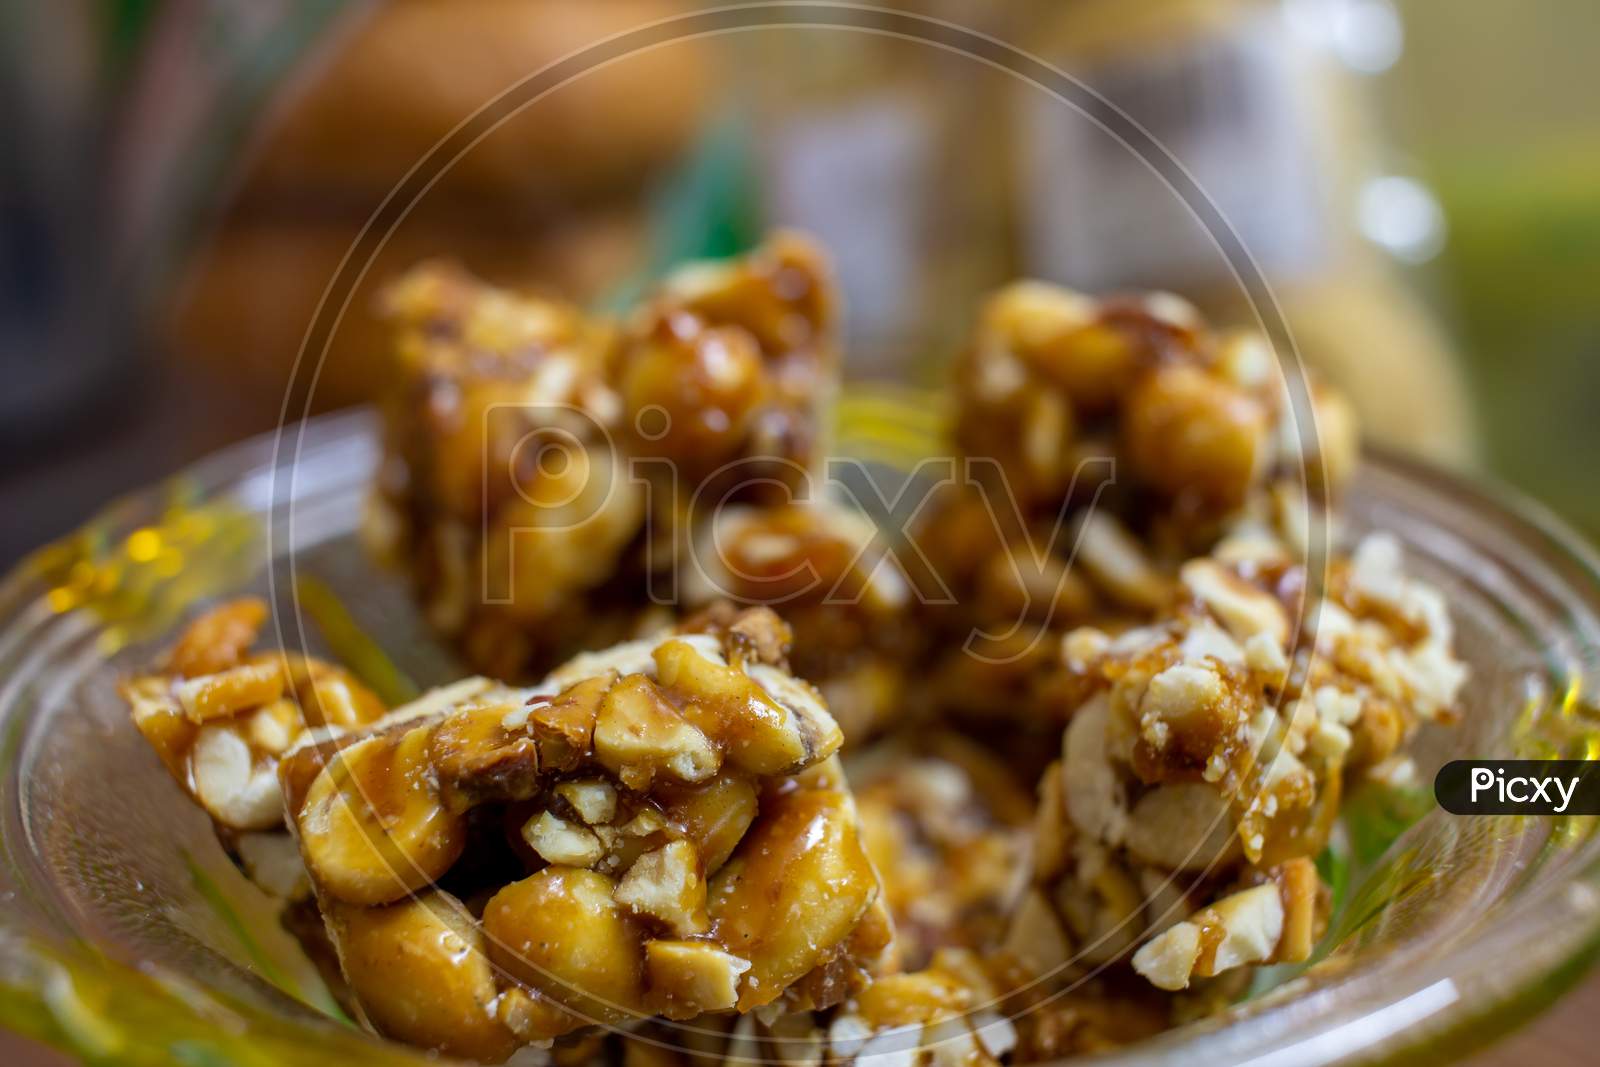 View Of Chikki, Which Is A Popular Indian Sweet Made From Ground Nut And Jaggery.